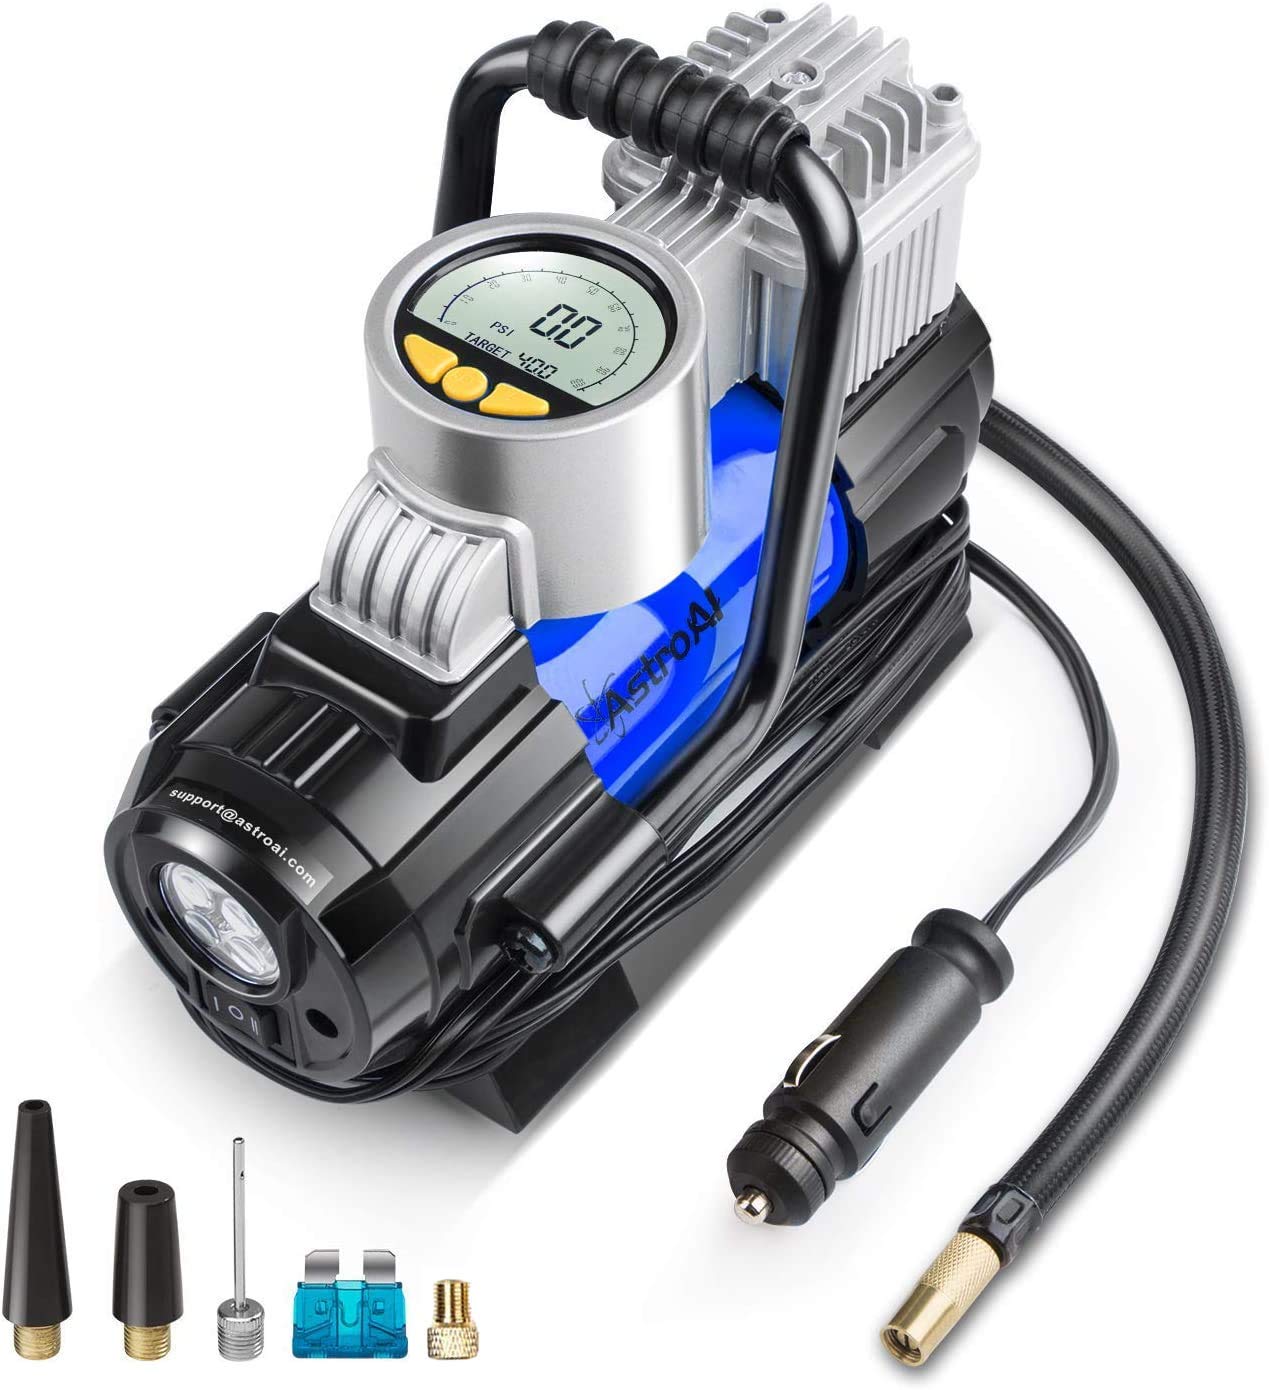 Book Cover AstroAI Portable Air Compressor Pump, Digital Tire Inflator 12V DC Electric Gauge with Larger Air Flow 35L/Min, LED Light, Overheat Protection, Extra Nozzle Adaptors and Fuse